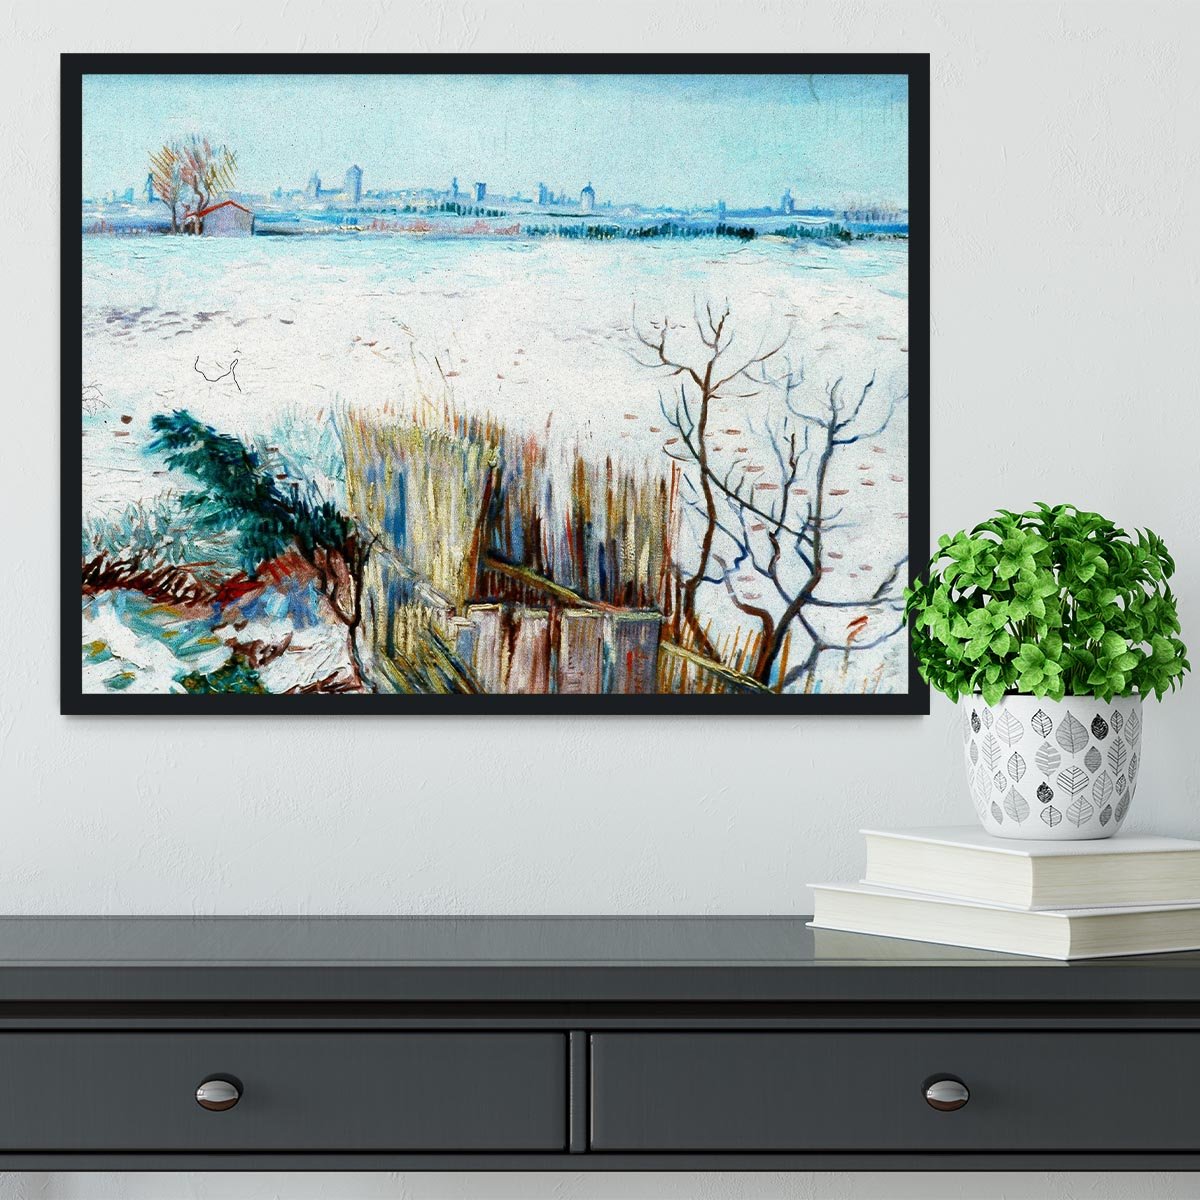 Snowy Landscape with Arles in the Background by Van Gogh Framed Print - Canvas Art Rocks - 2